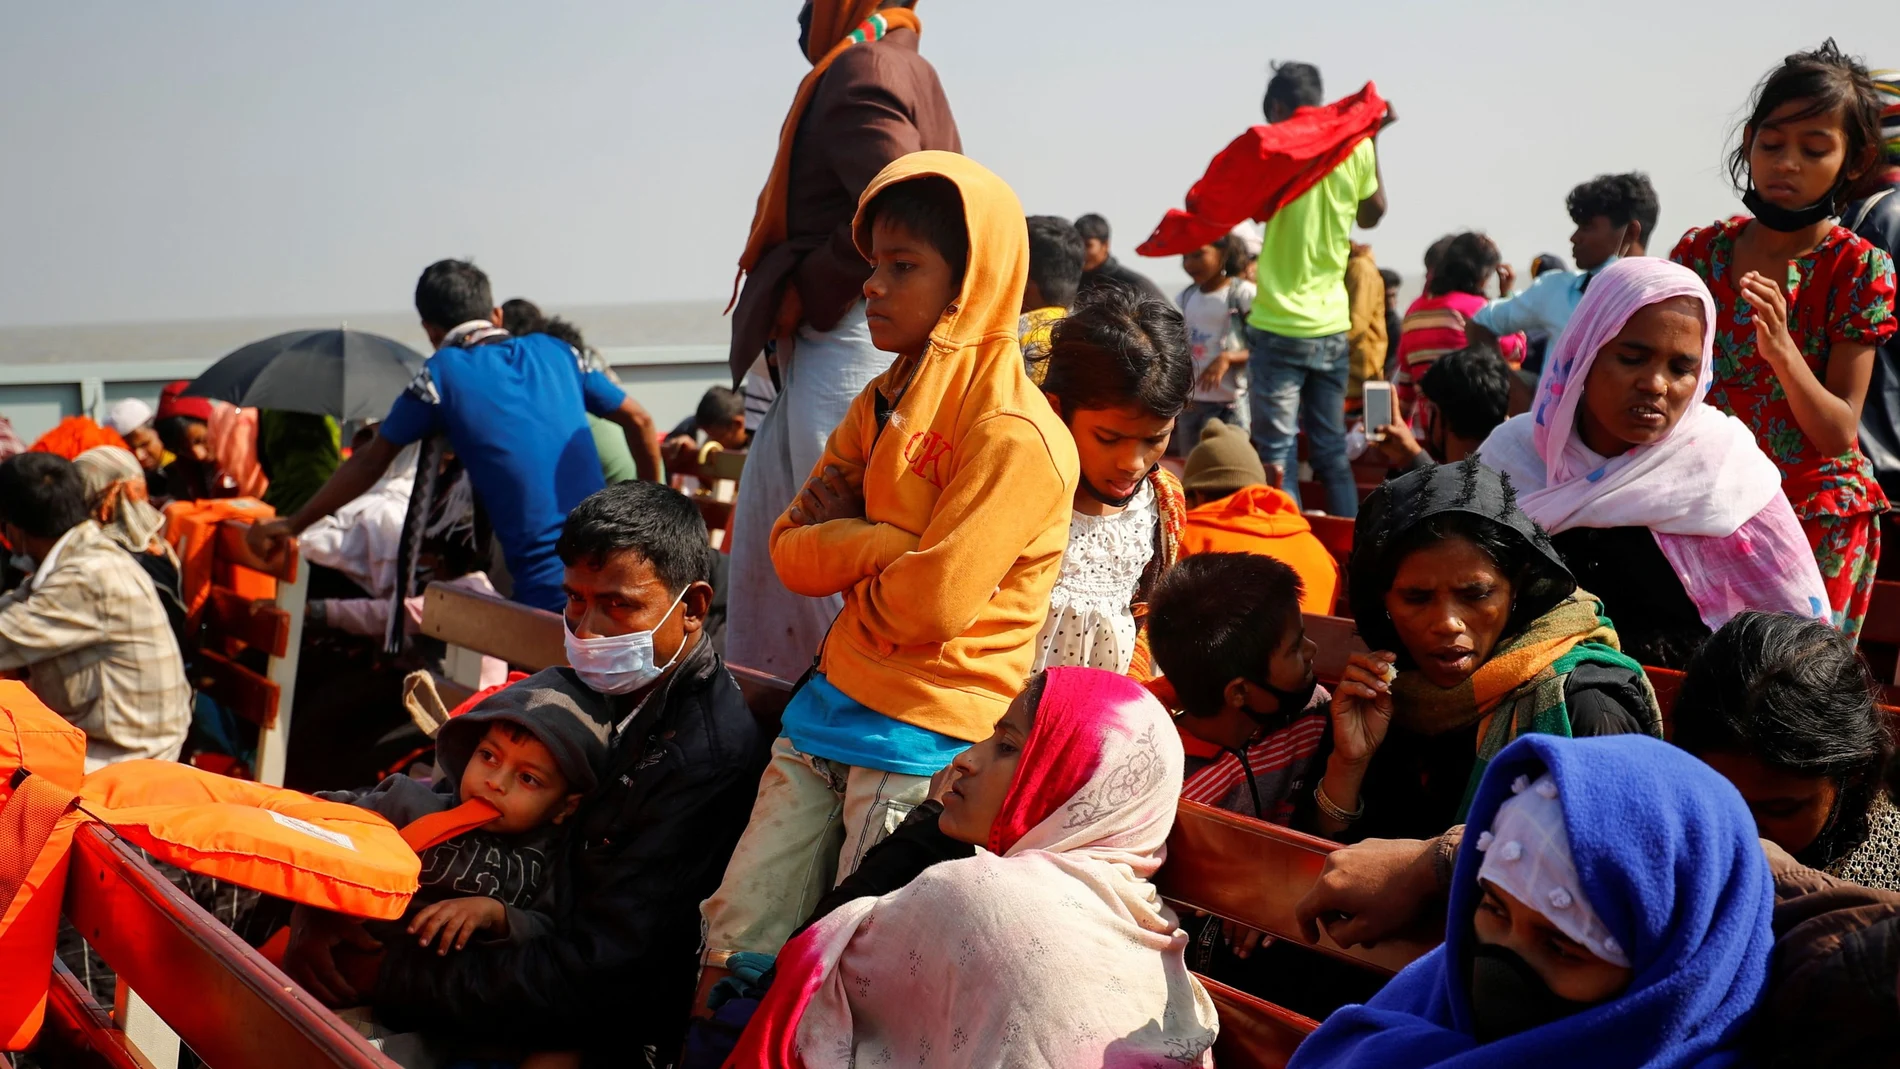 FILE PHOTO: Rohingya refugees sit on wooden benches of a navy vessel on their way to the Bhasan Char island in Noakhali district, Bangladesh, December 29, 2020. REUTERS/Mohammad Ponir Hossain/File Photo